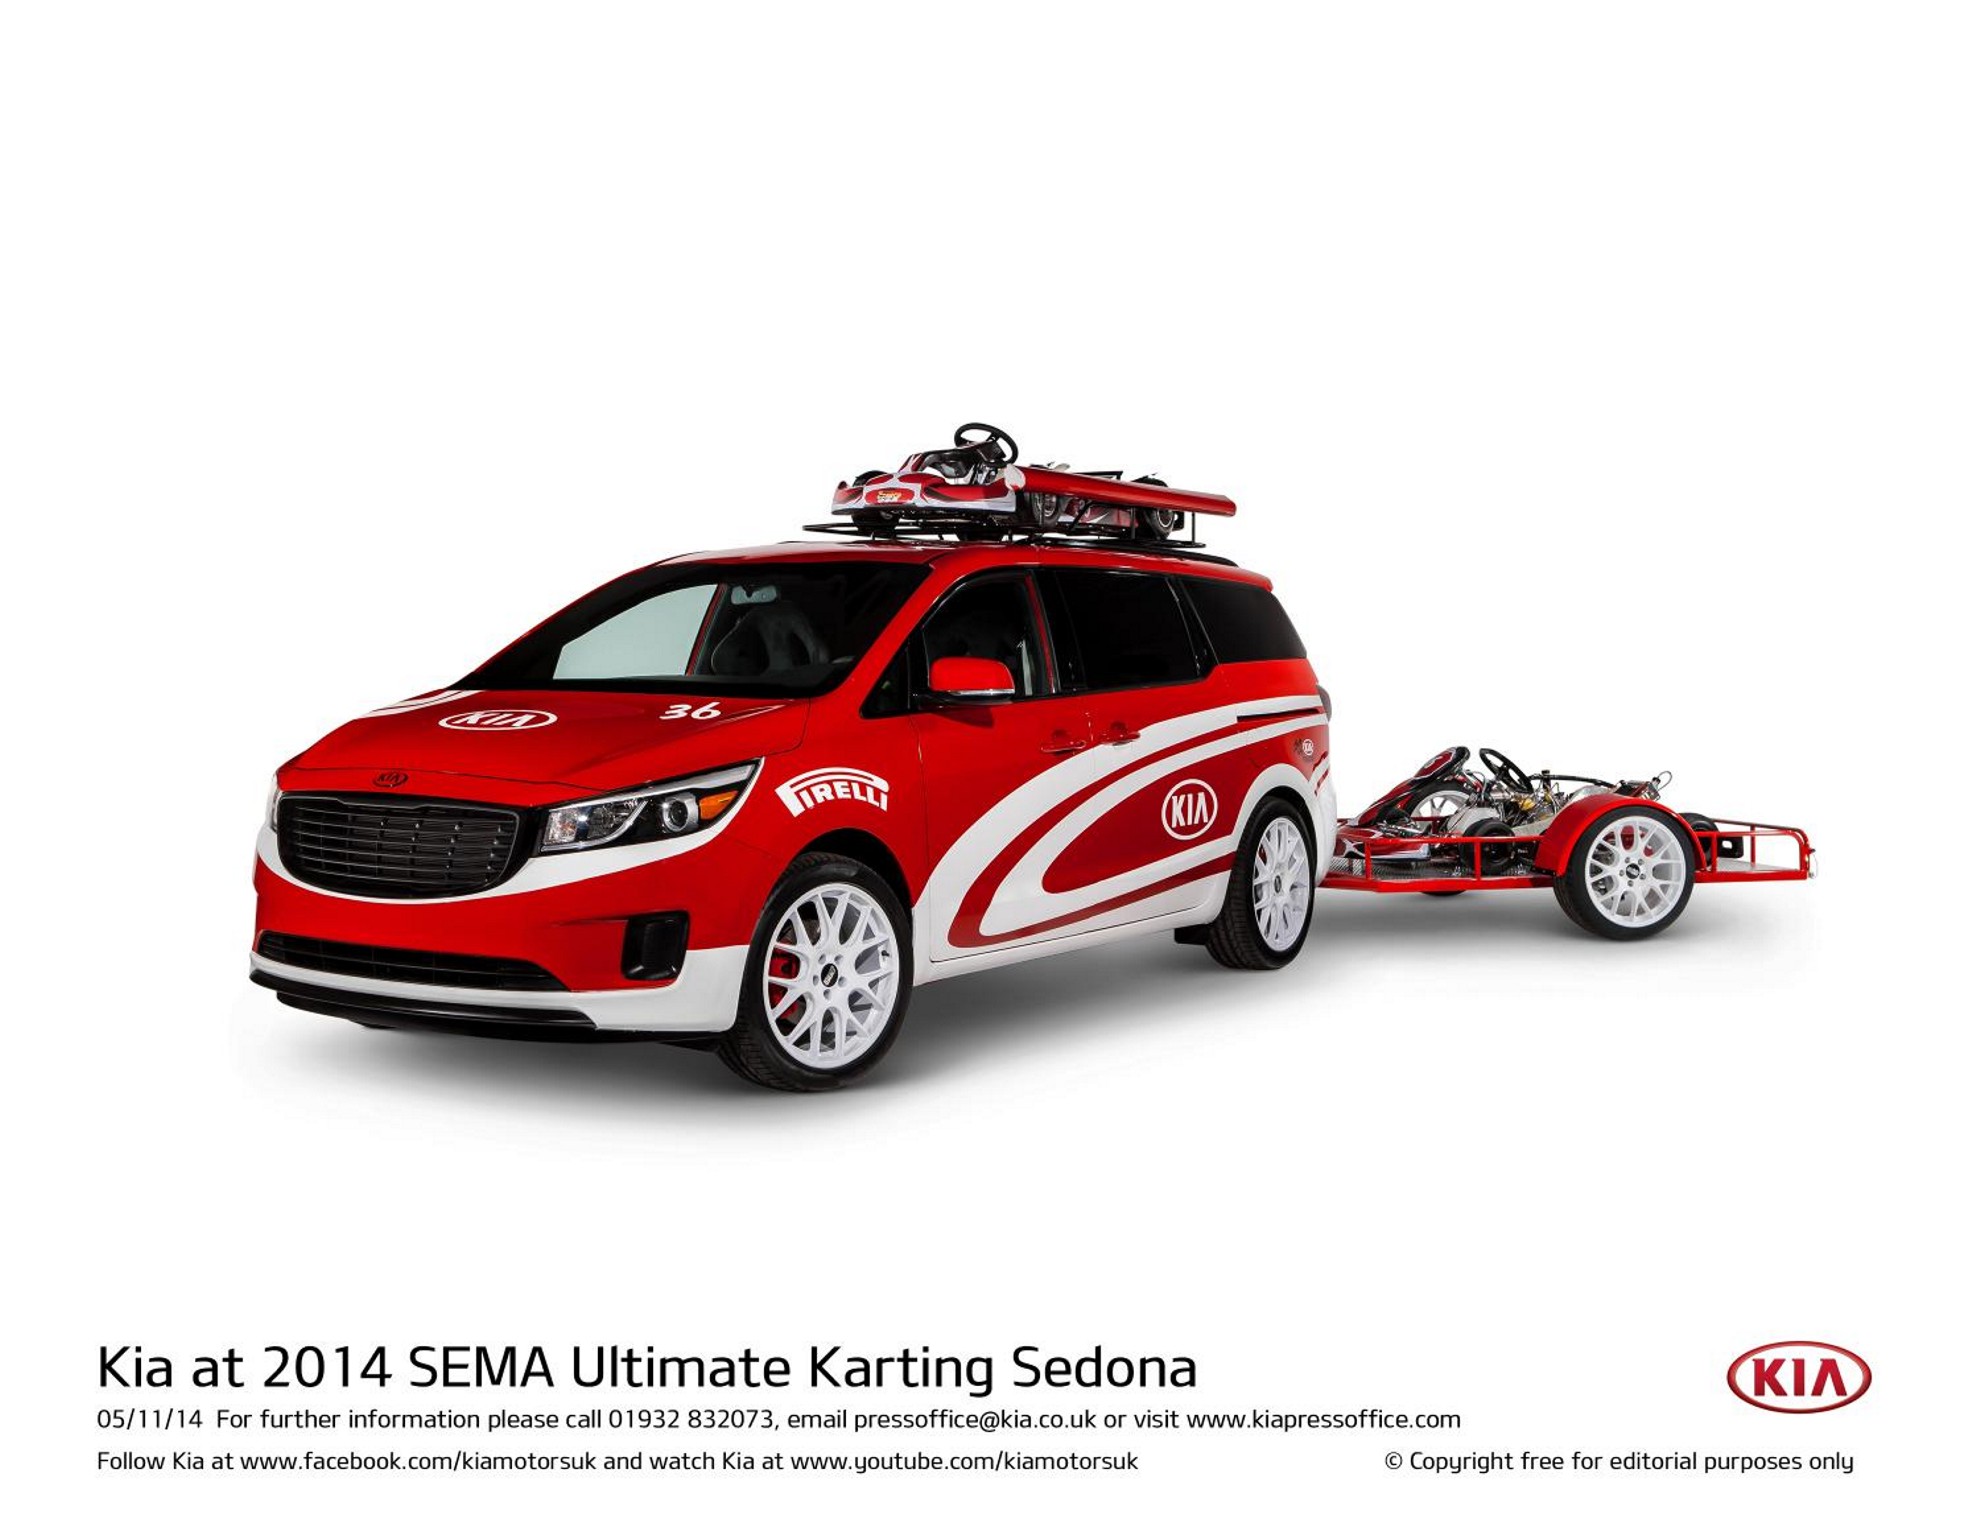 KIA ‘A DAY AT THE RACES’ THEME FOR 2014 SEMA SHOW.